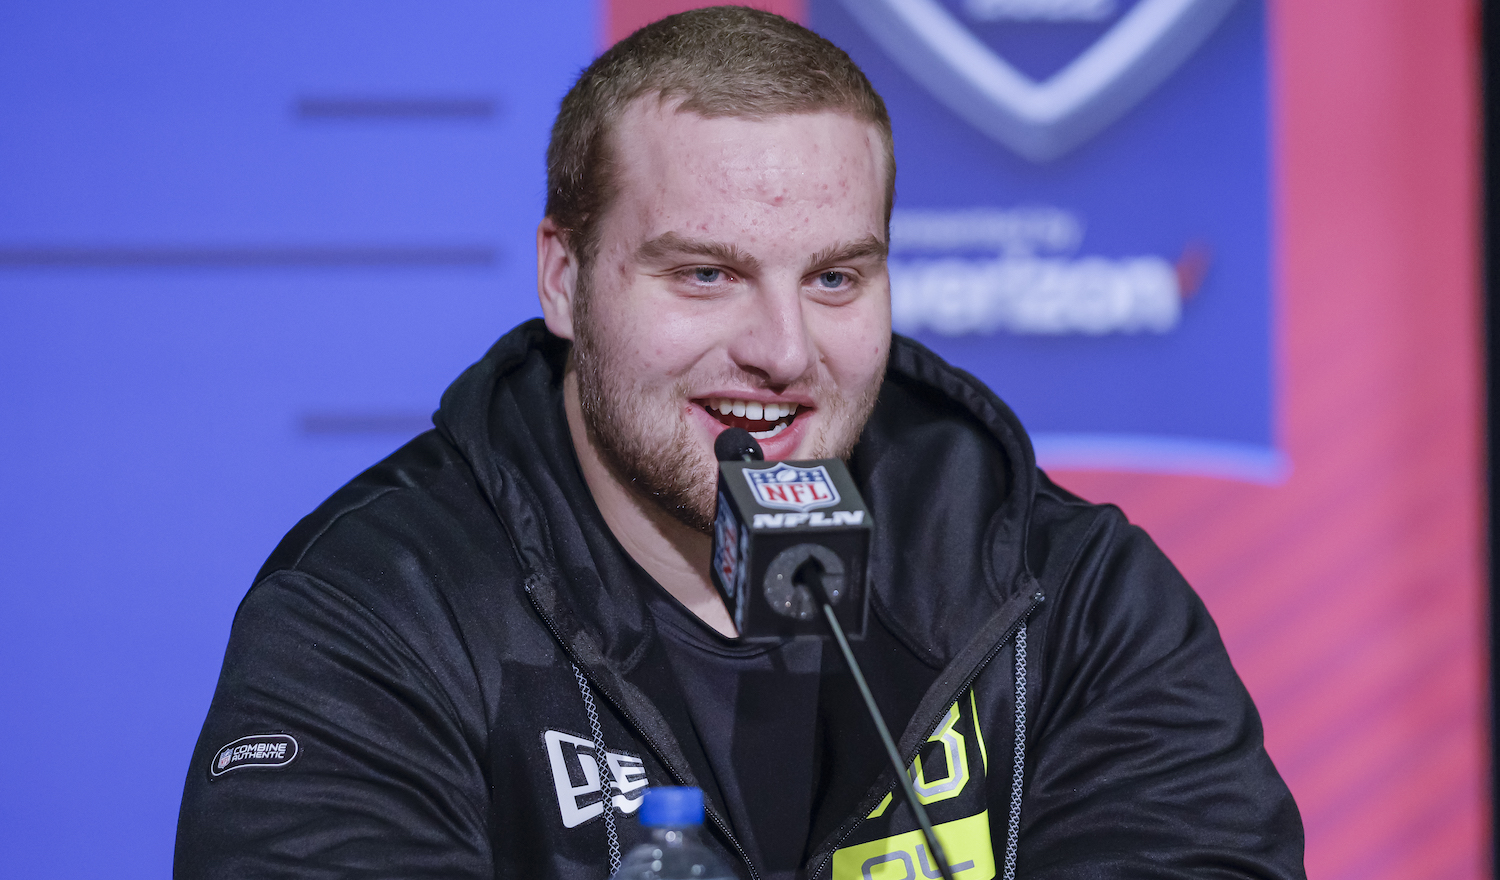 INDIANAPOLIS, IN - MAR 03: Trevor Penning #OL38 of the Northern Iowa Panthers speaks to reporters during the NFL Draft Combine at the Indiana Convention Center on March 3, 2022 in Indianapolis, Indiana. (Photo by Michael Hickey/Getty Images)